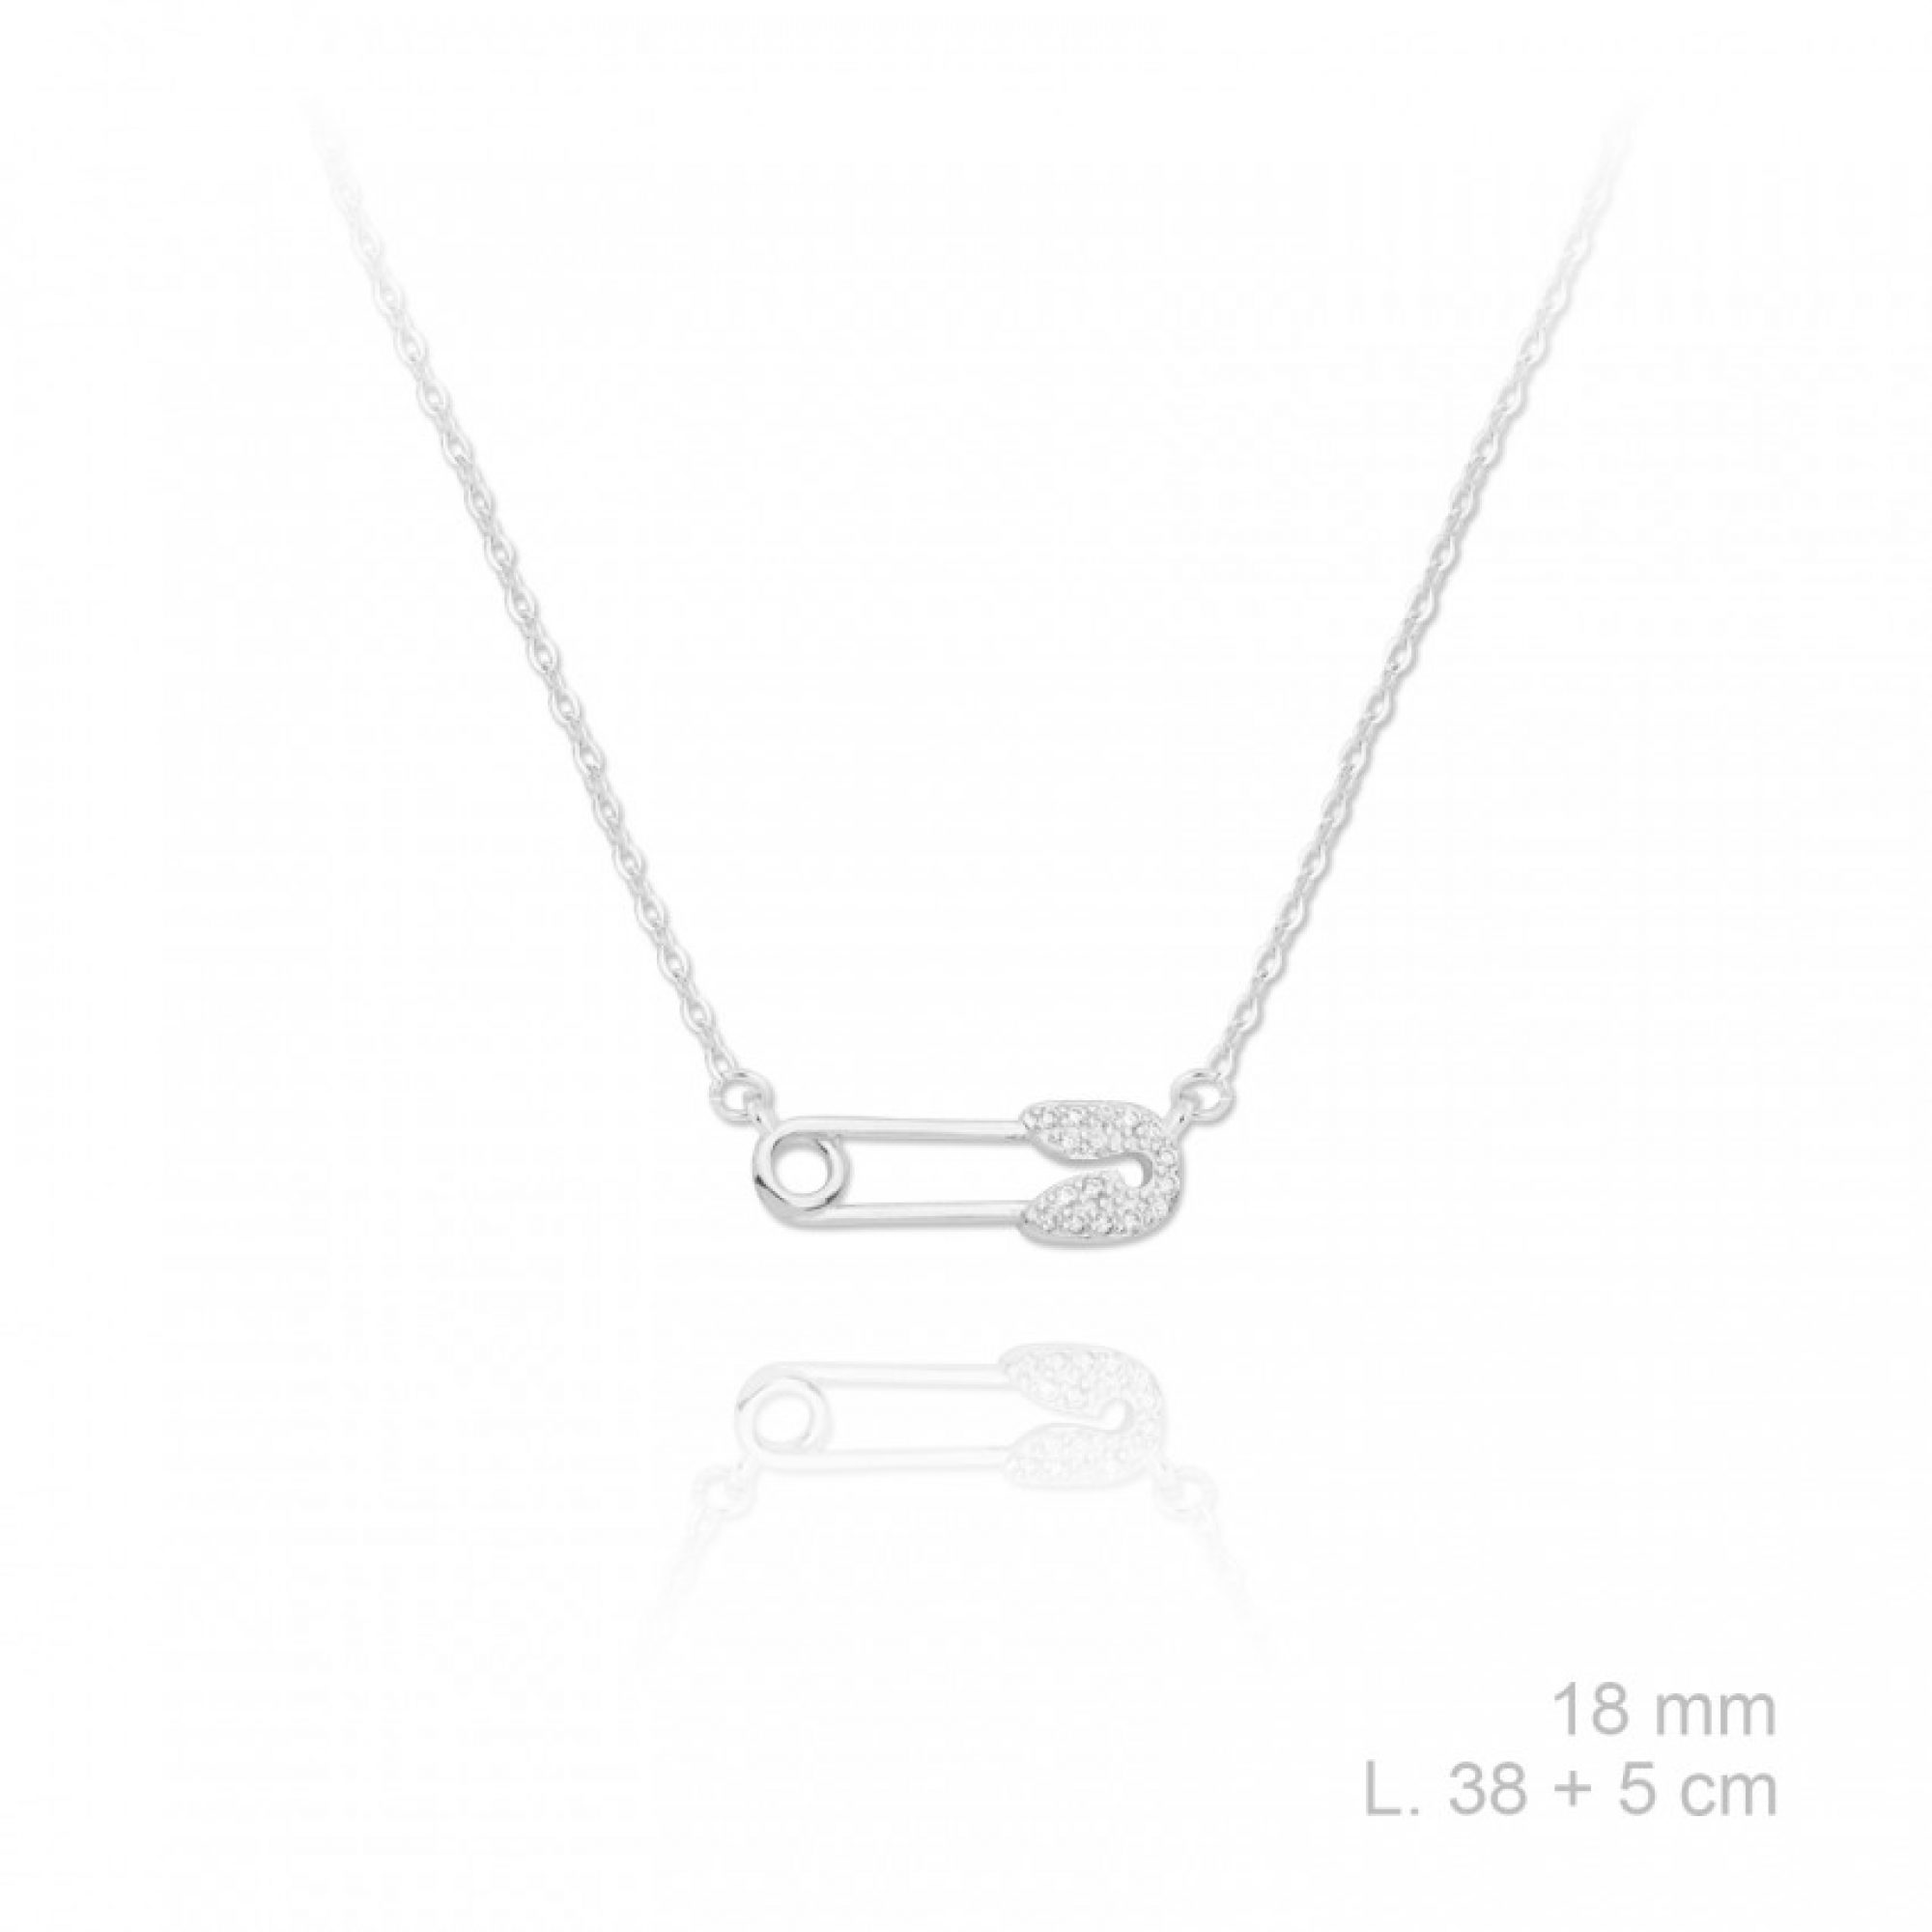 Safety pin necklace with zircon stones